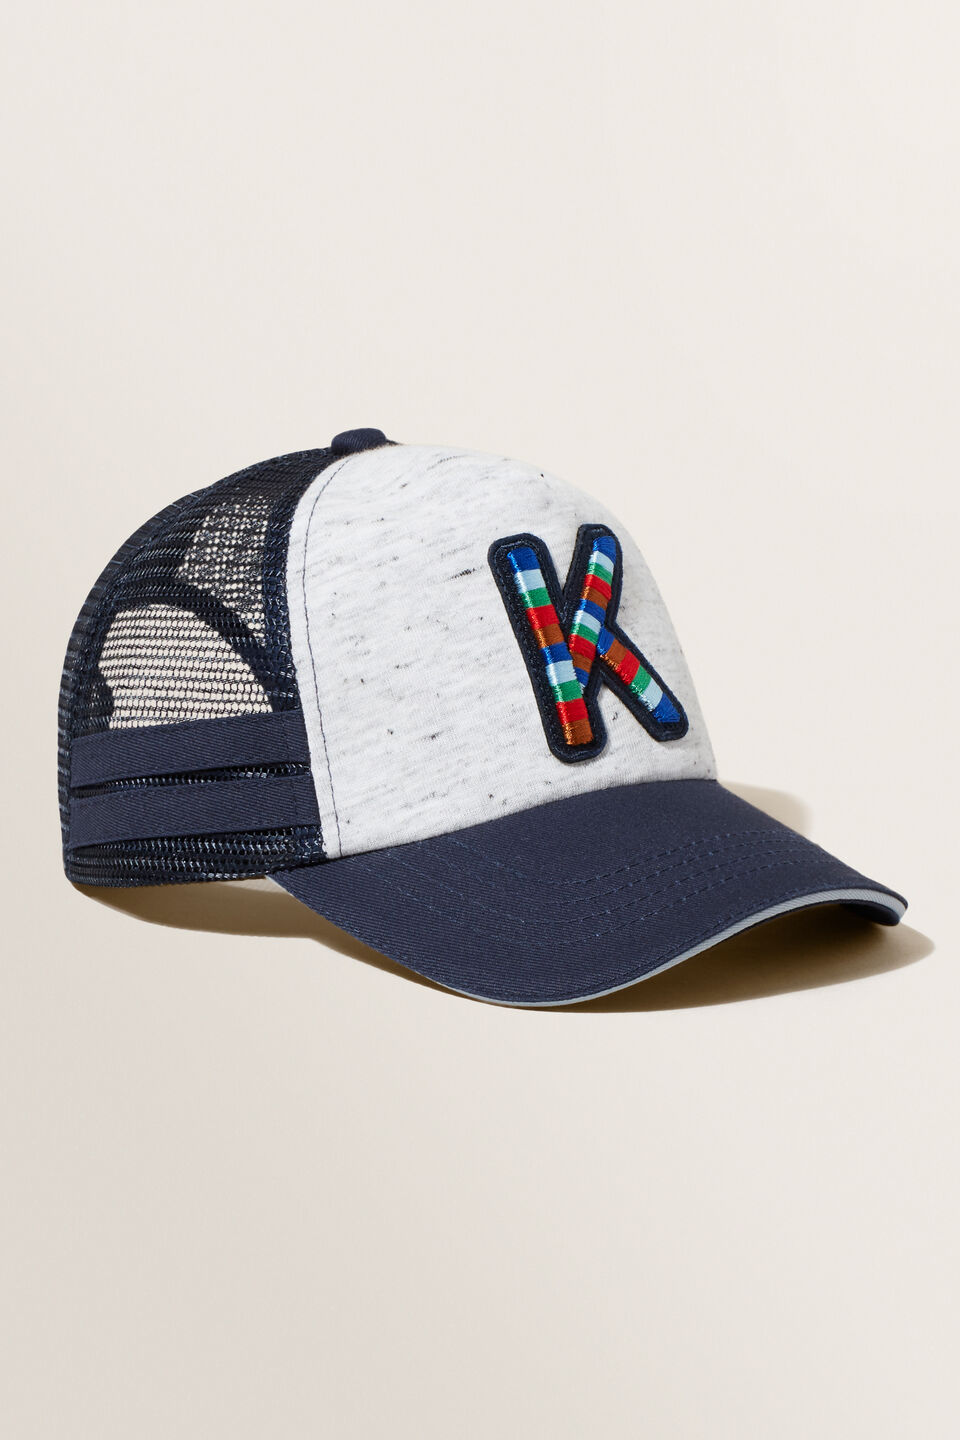 Embroidered Initial Cap  K